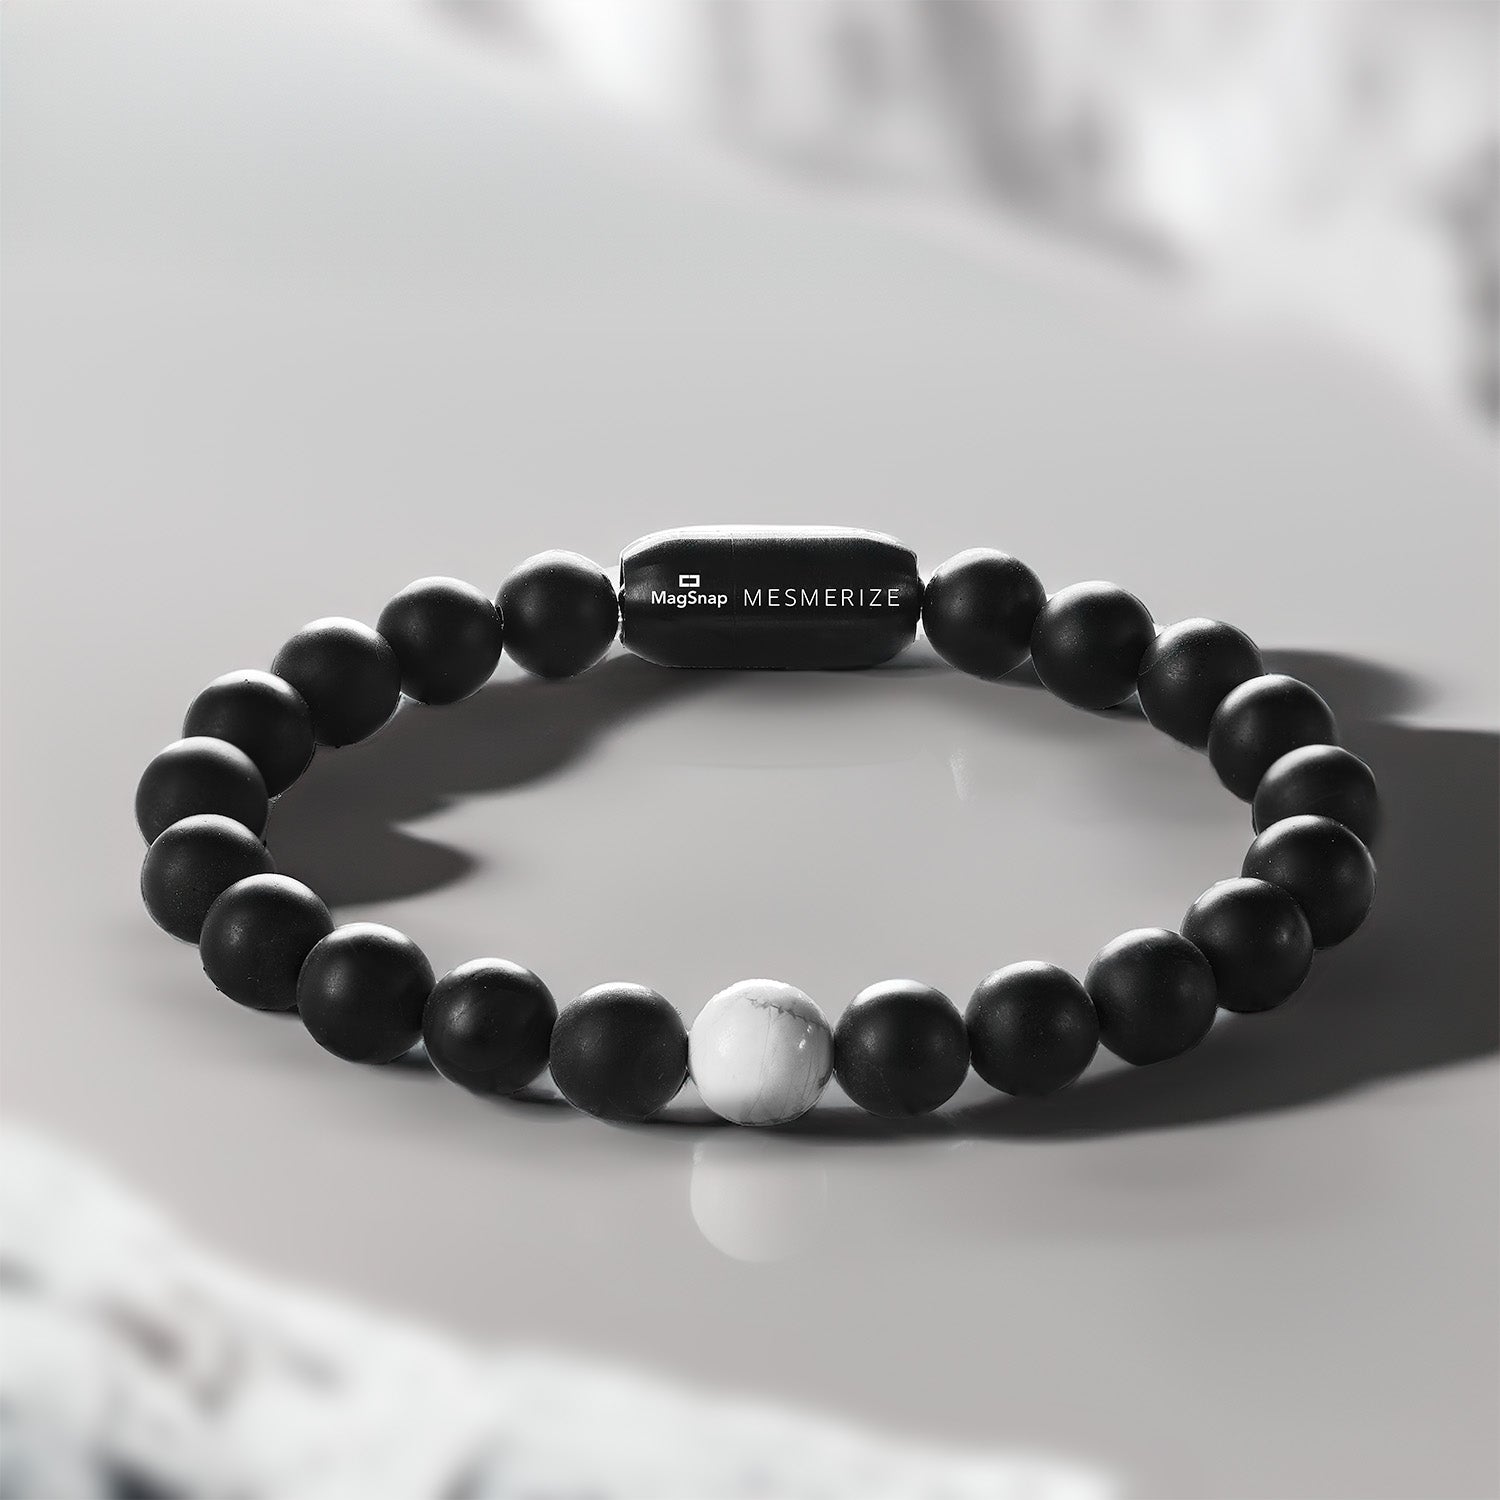 Natural Stone Jewellery Black Onyx and Howlite Bracelet With MagSnap